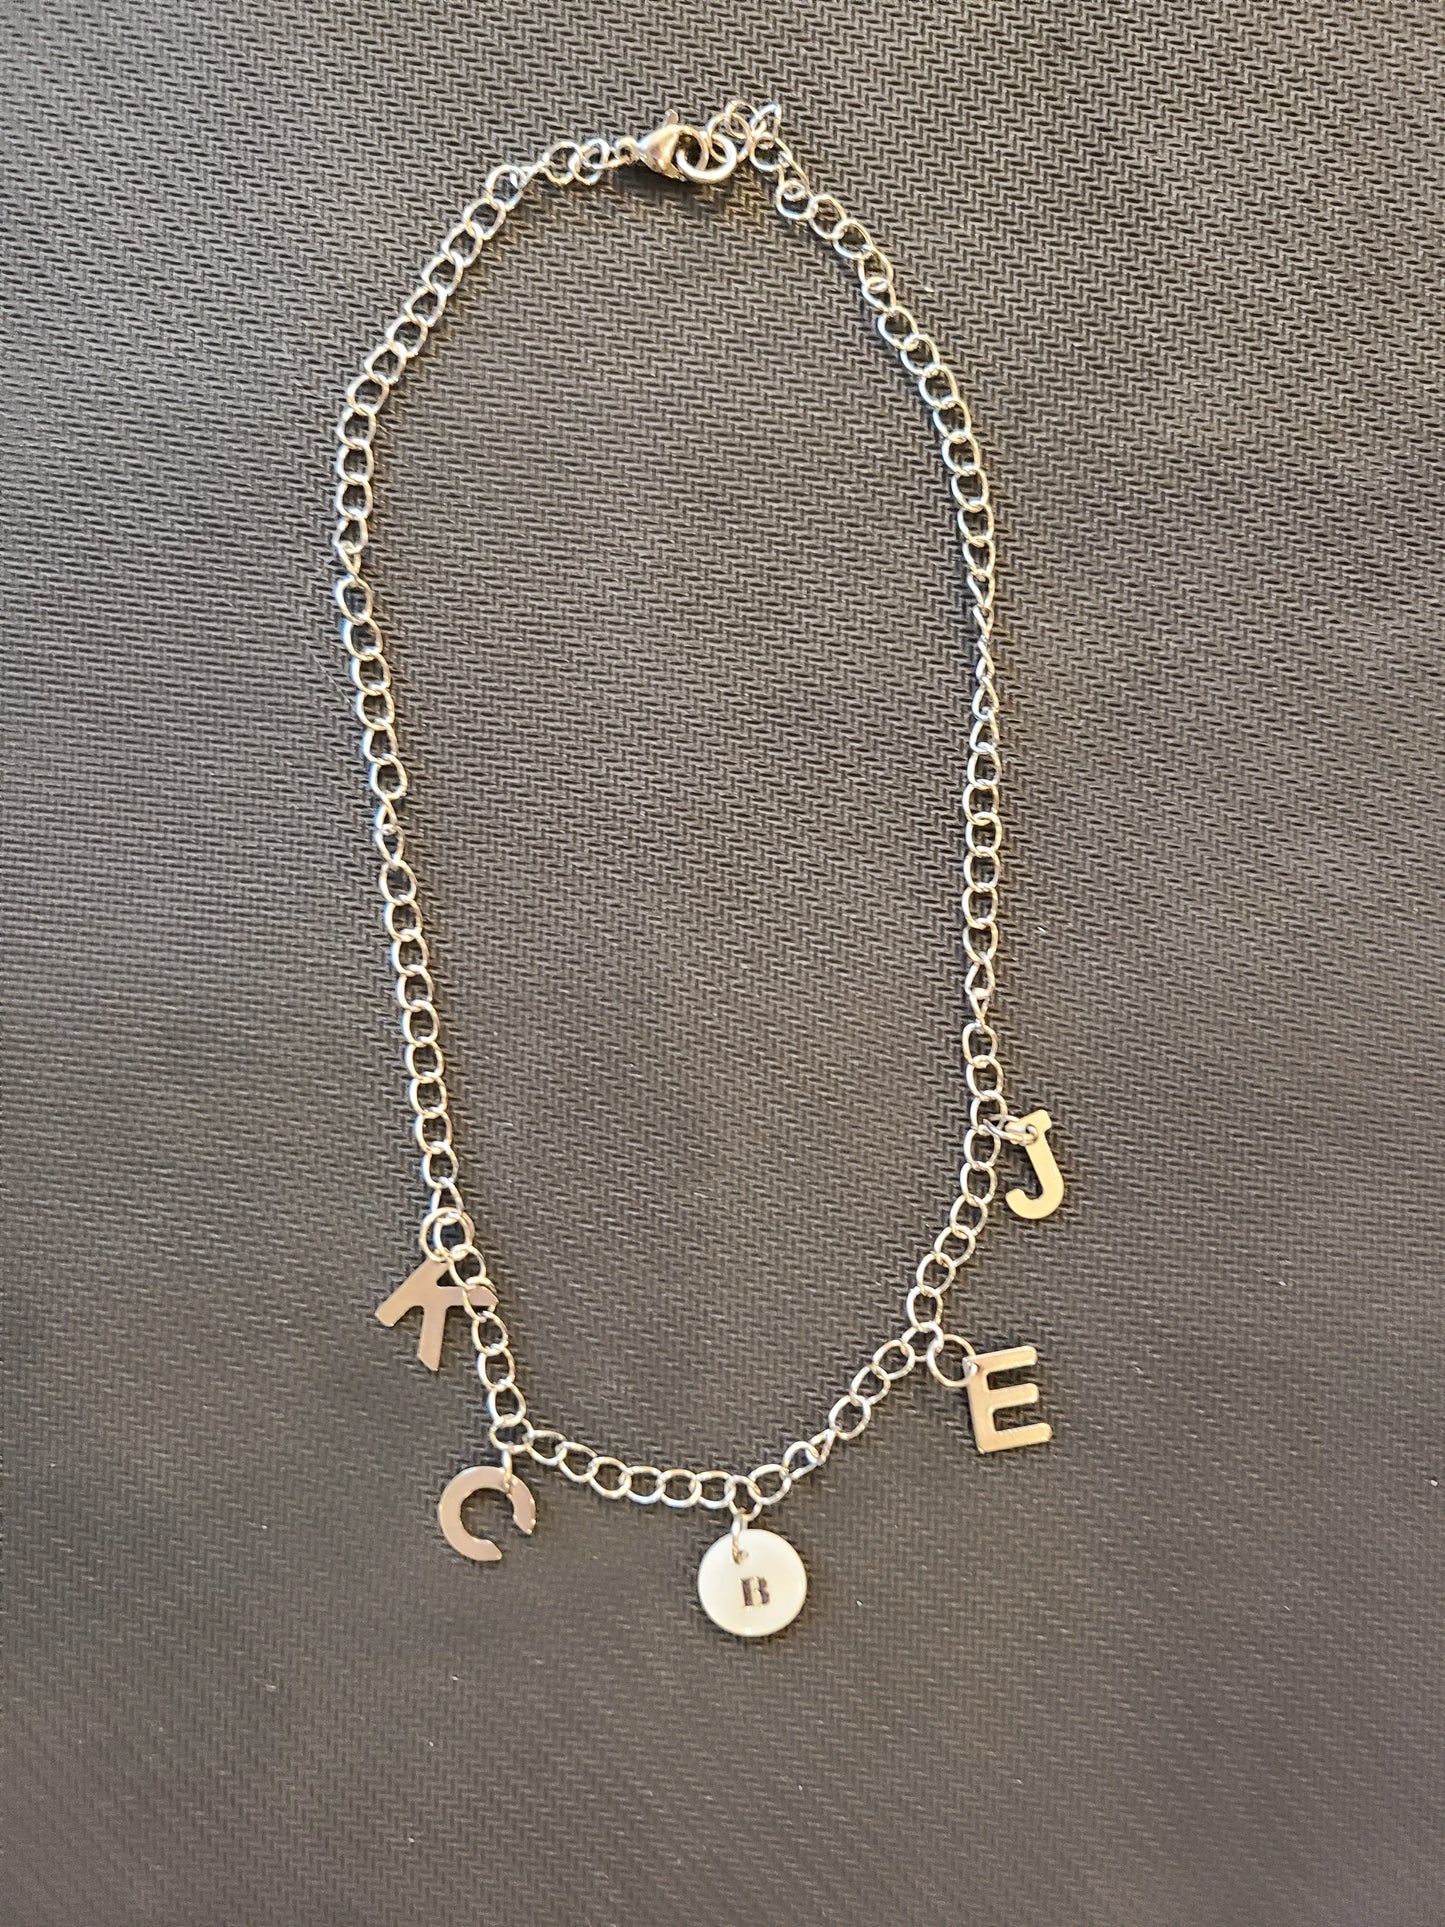 Custom Personalized Family Charm Necklace